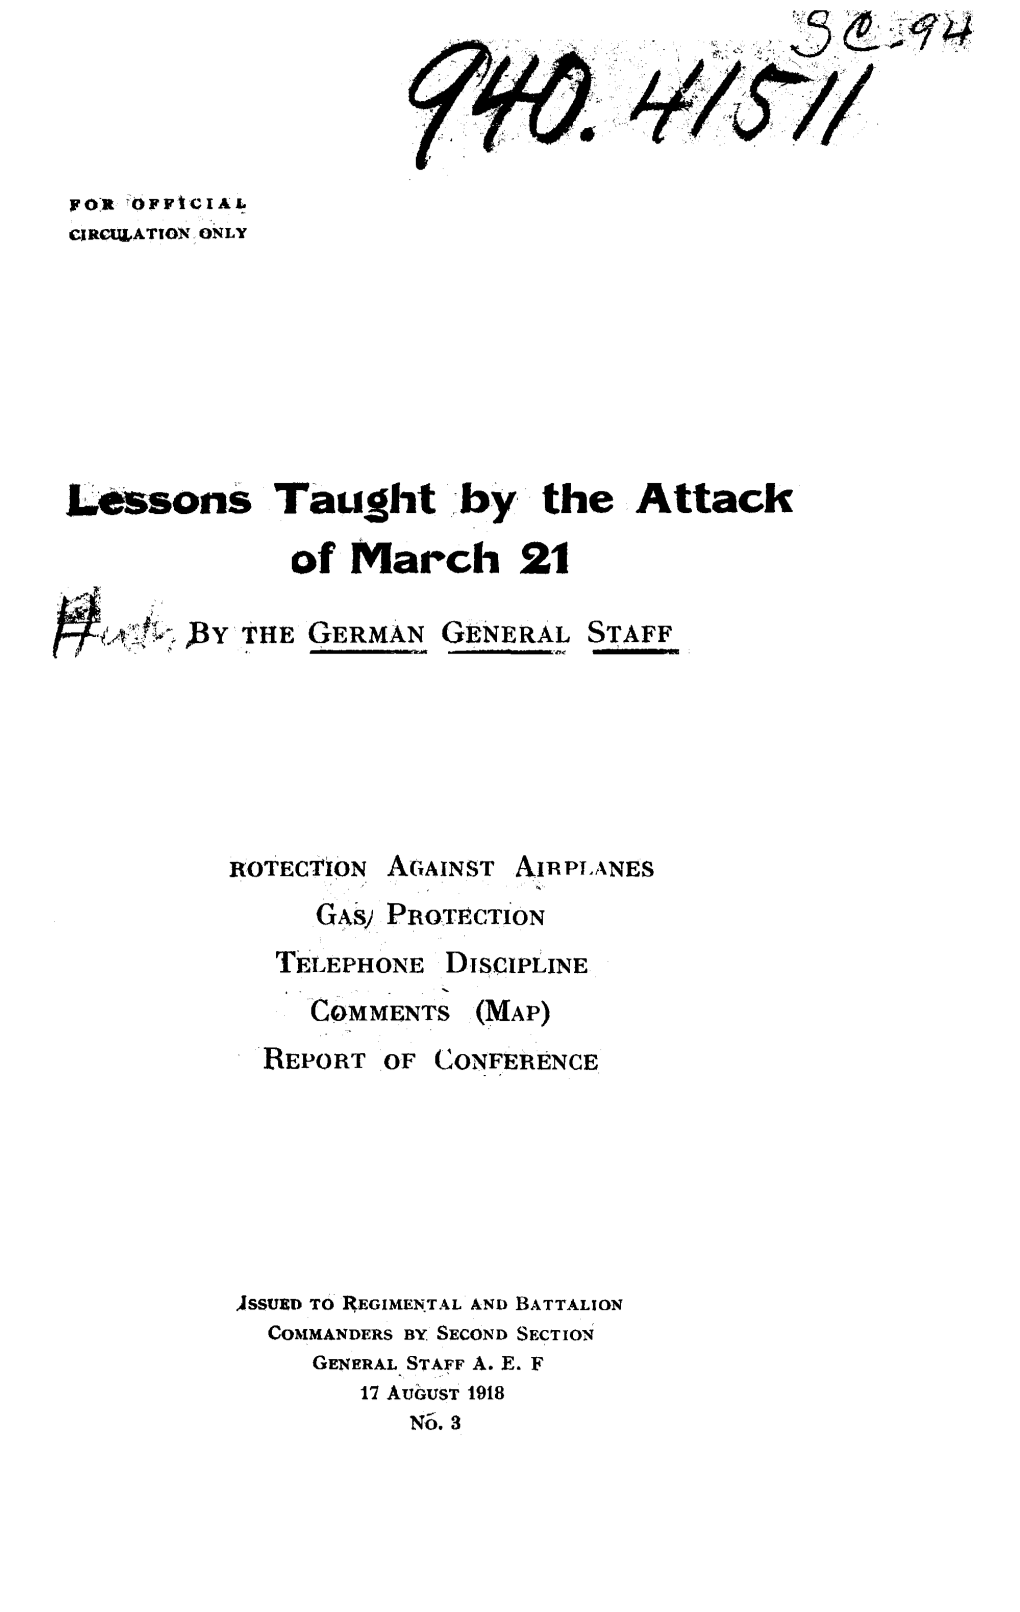 Lessons Taught by the Attack of March 21